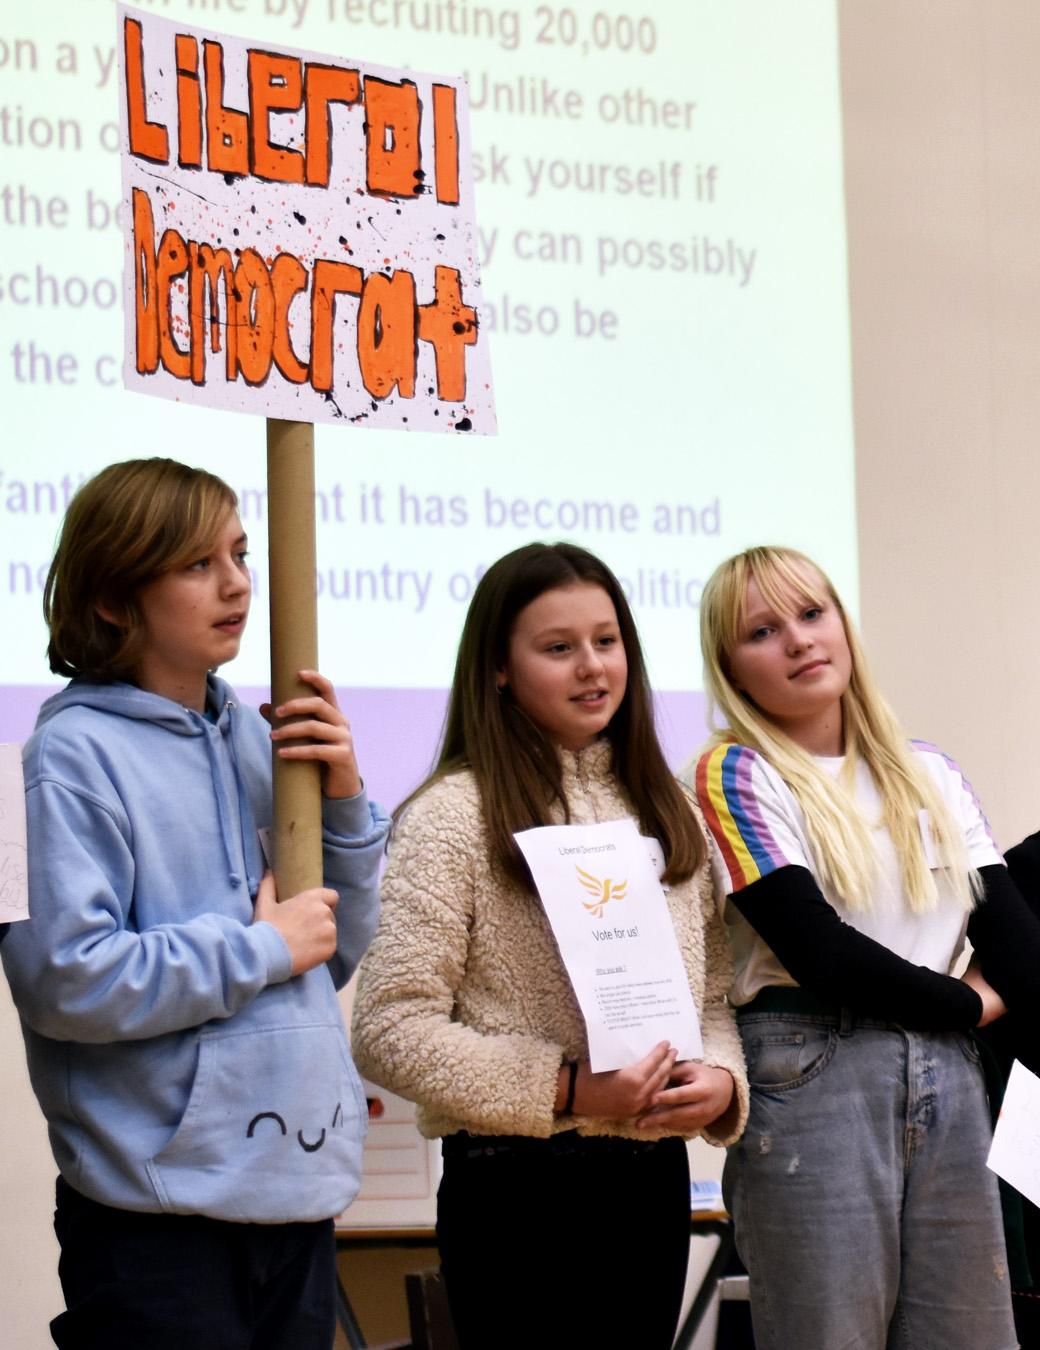 Mayville pupils are introduced to a wide range of social issues, to encourage a sense of civic responsibility